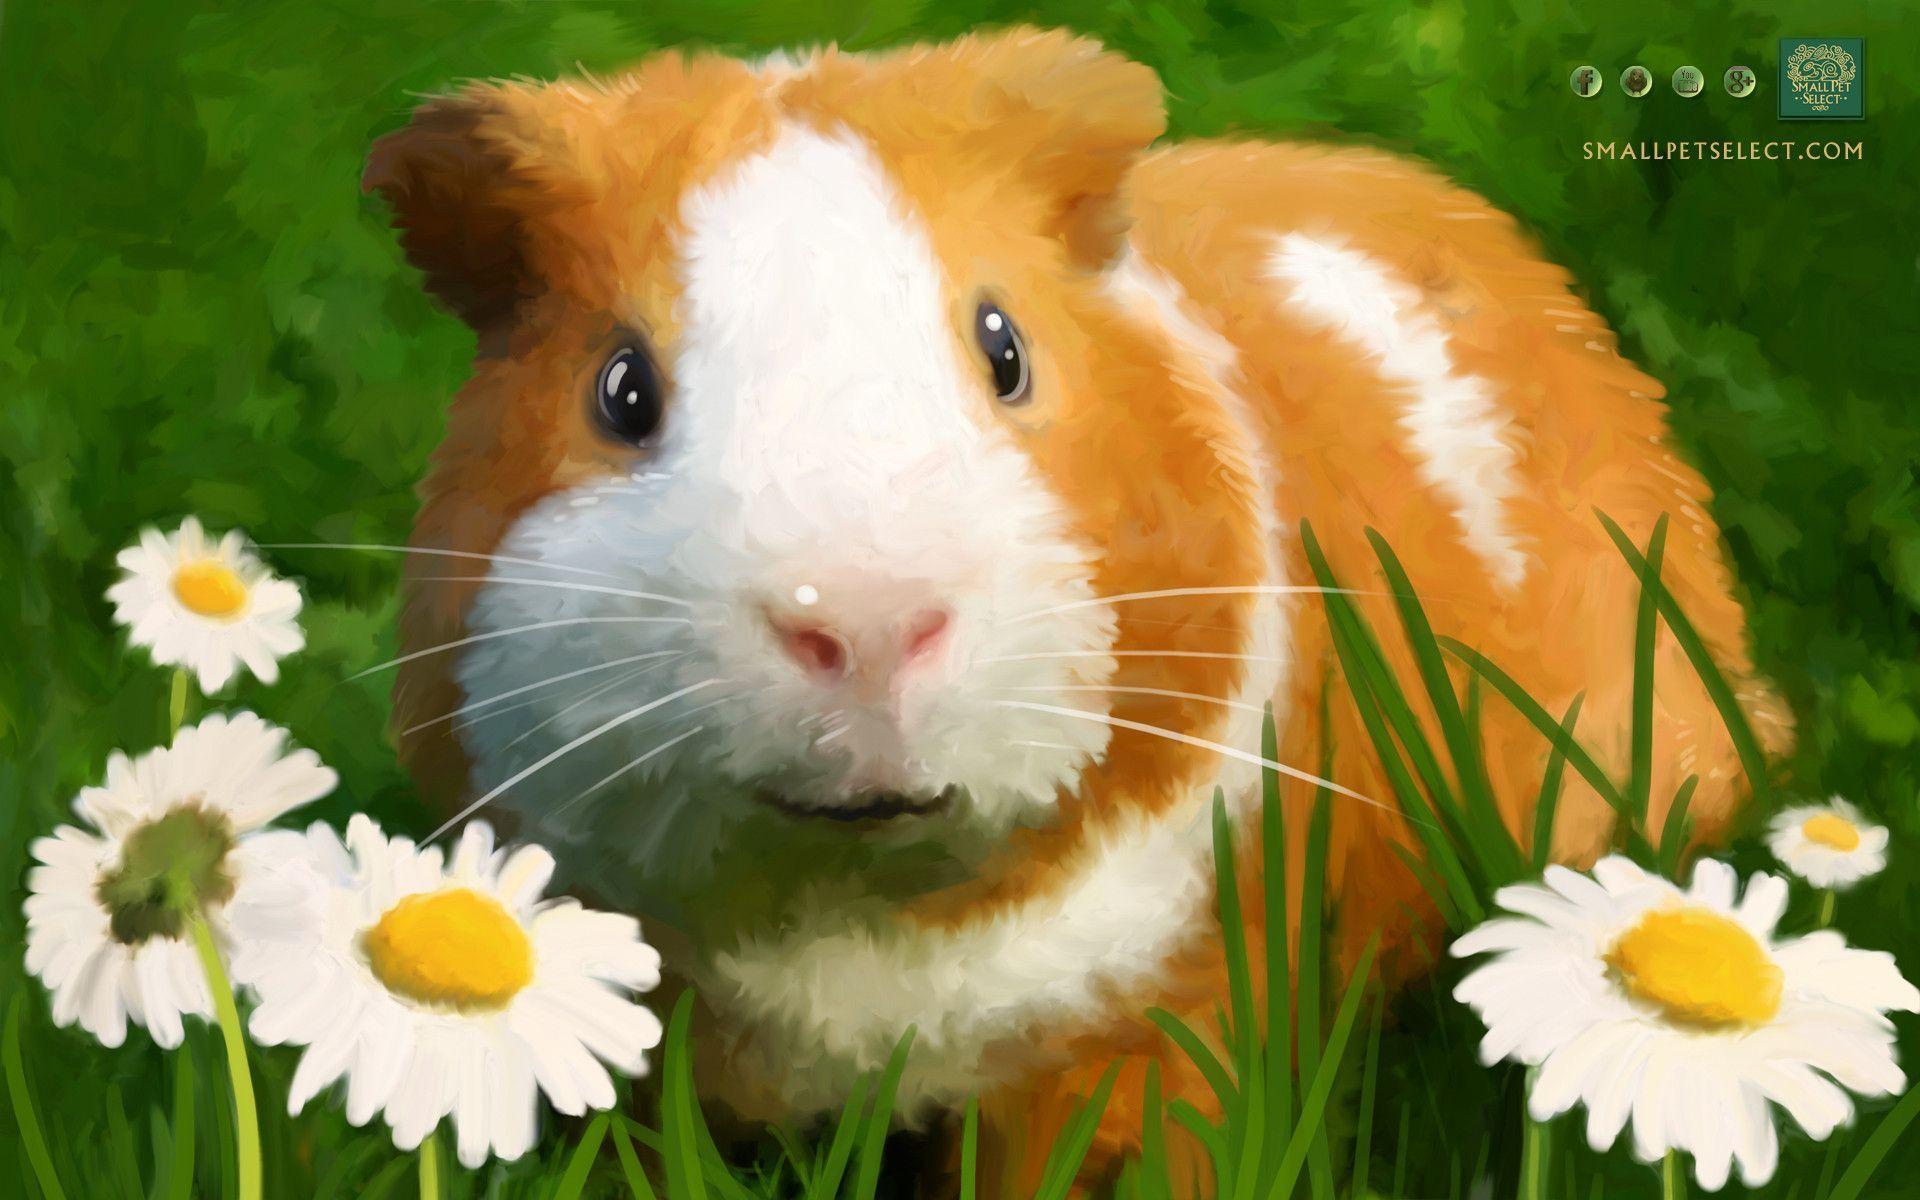 Guinea Pig Wallpaper for your PC, MAC, iPad & cell phone